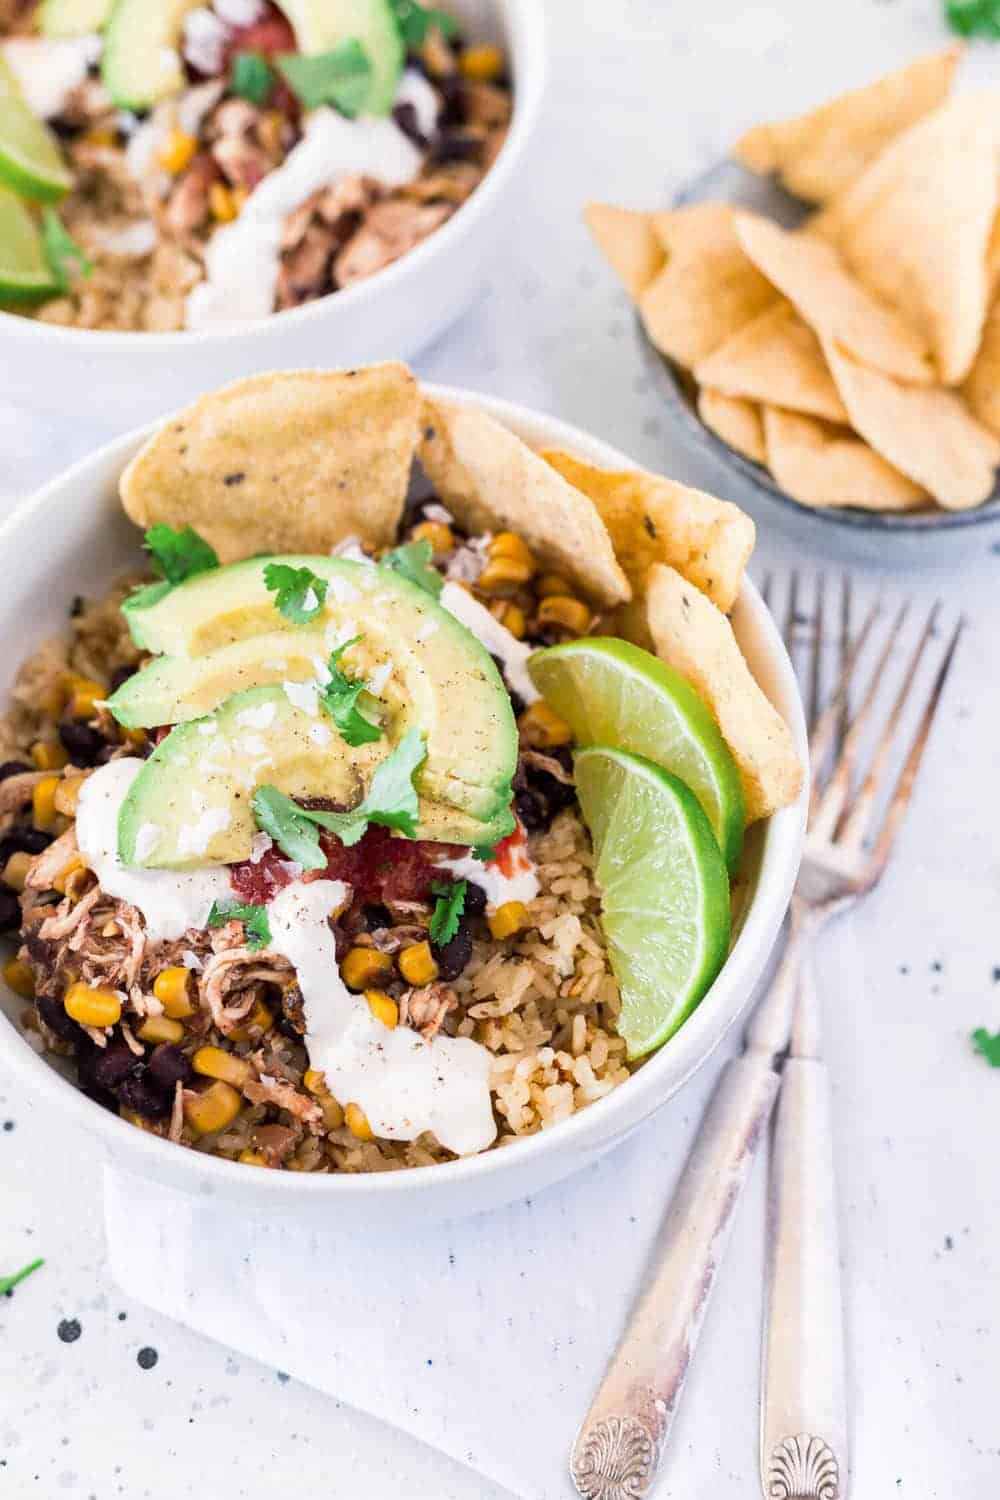 Chicken taco bowl topped with sliced avocado, sour cream, cilantro, fresh limes and tortilla chips.